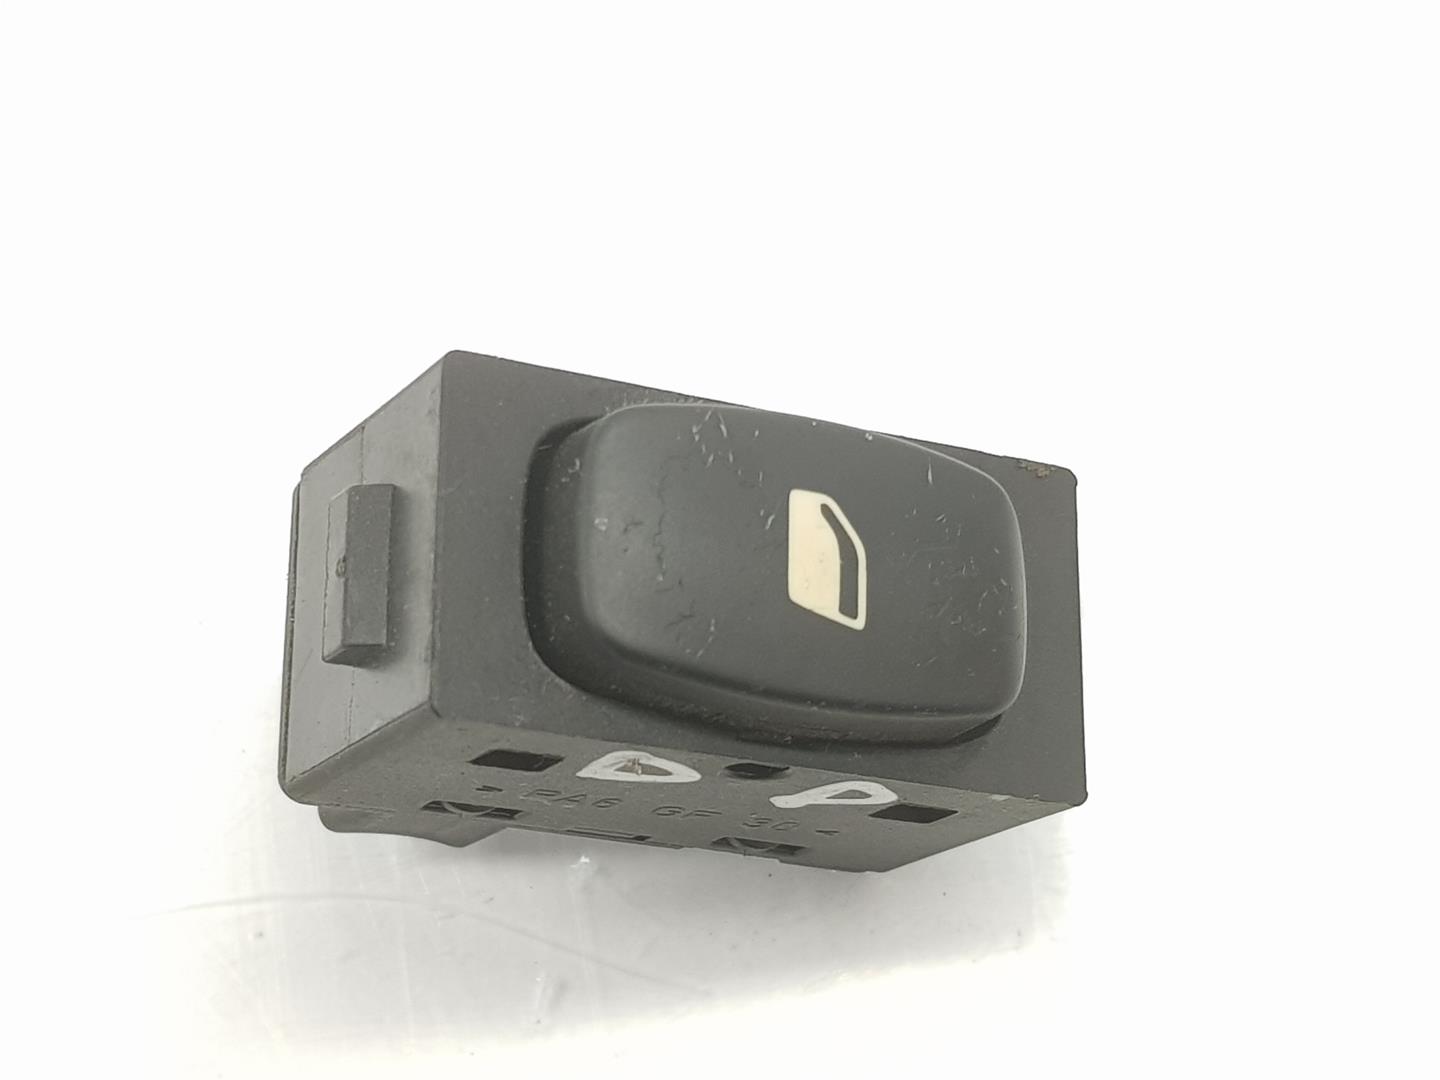 PEUGEOT 407 1 generation (2004-2010) Front Right Door Window Switch 6554E8, 6554E8 19865322